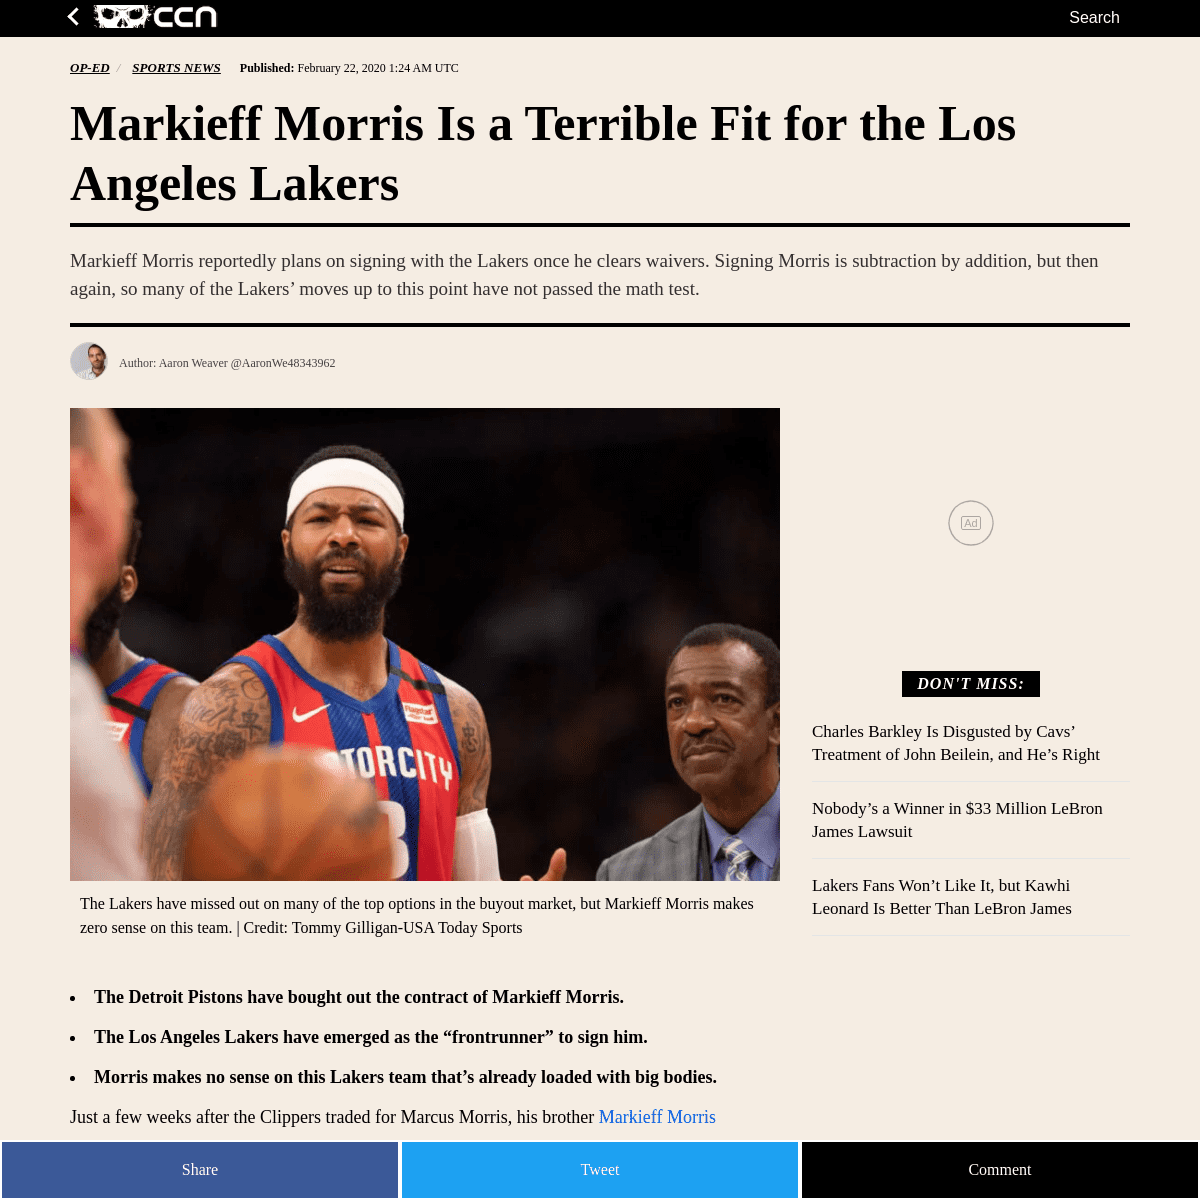 Markieff Morris Is a Terrible Fit for the Los Angeles Lakers